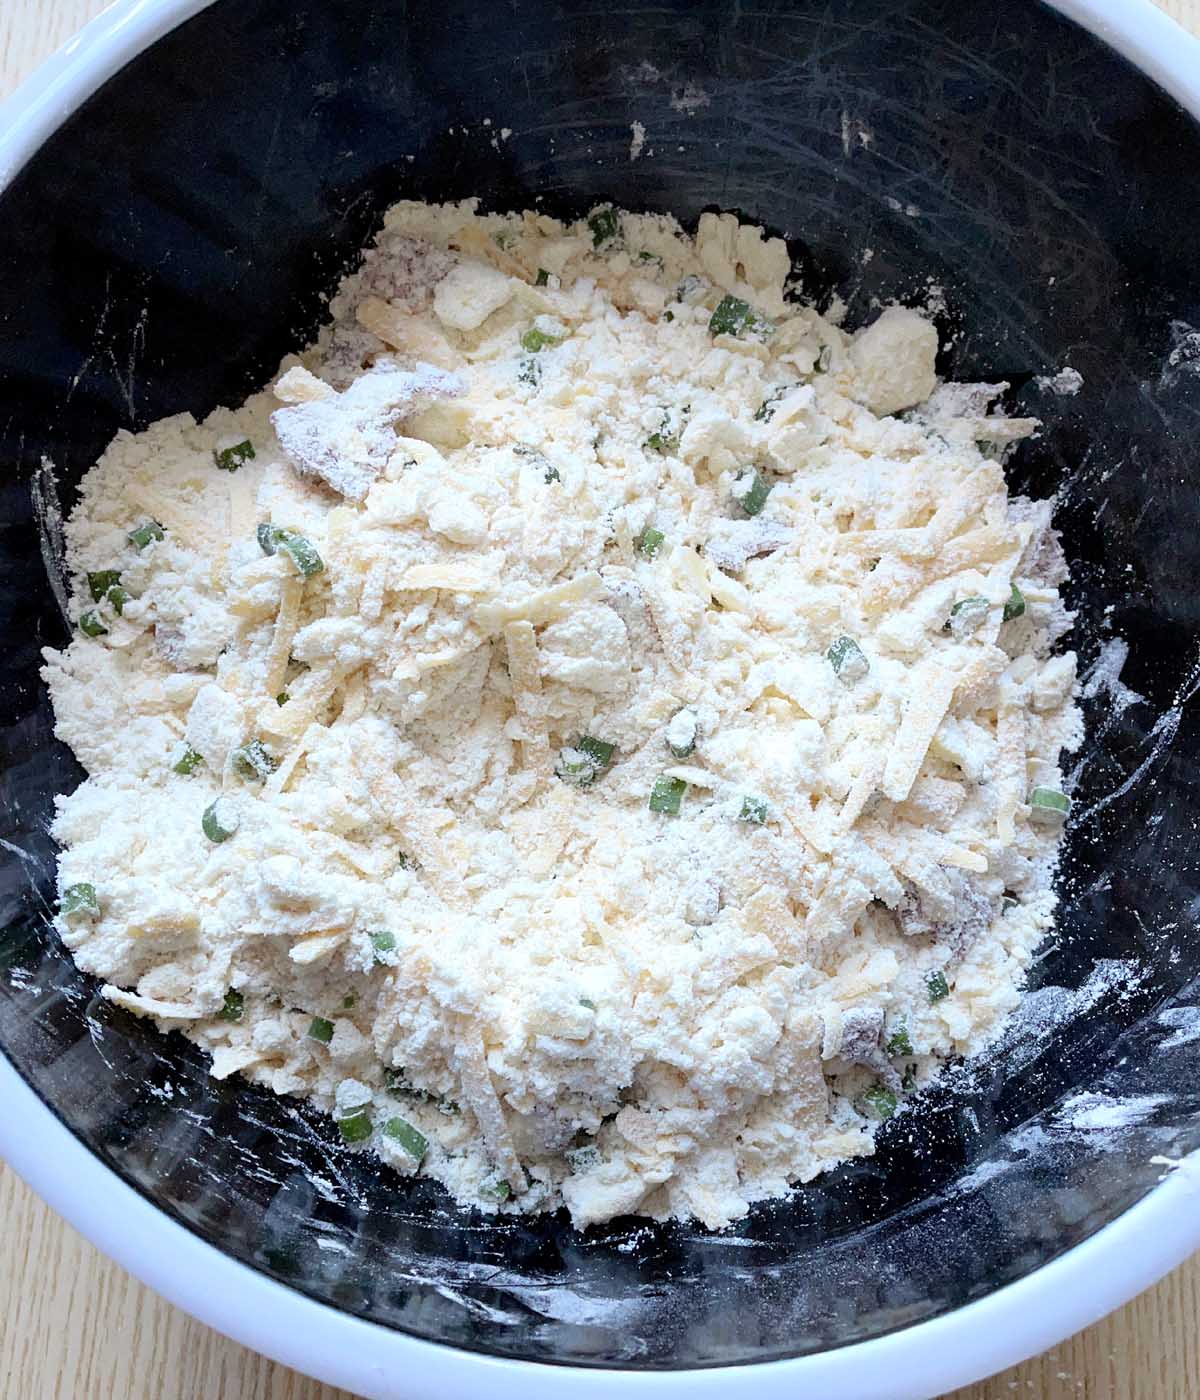 Grated cheese, crumbled bacon, and green onions coated with a flour mixture in a bowl.